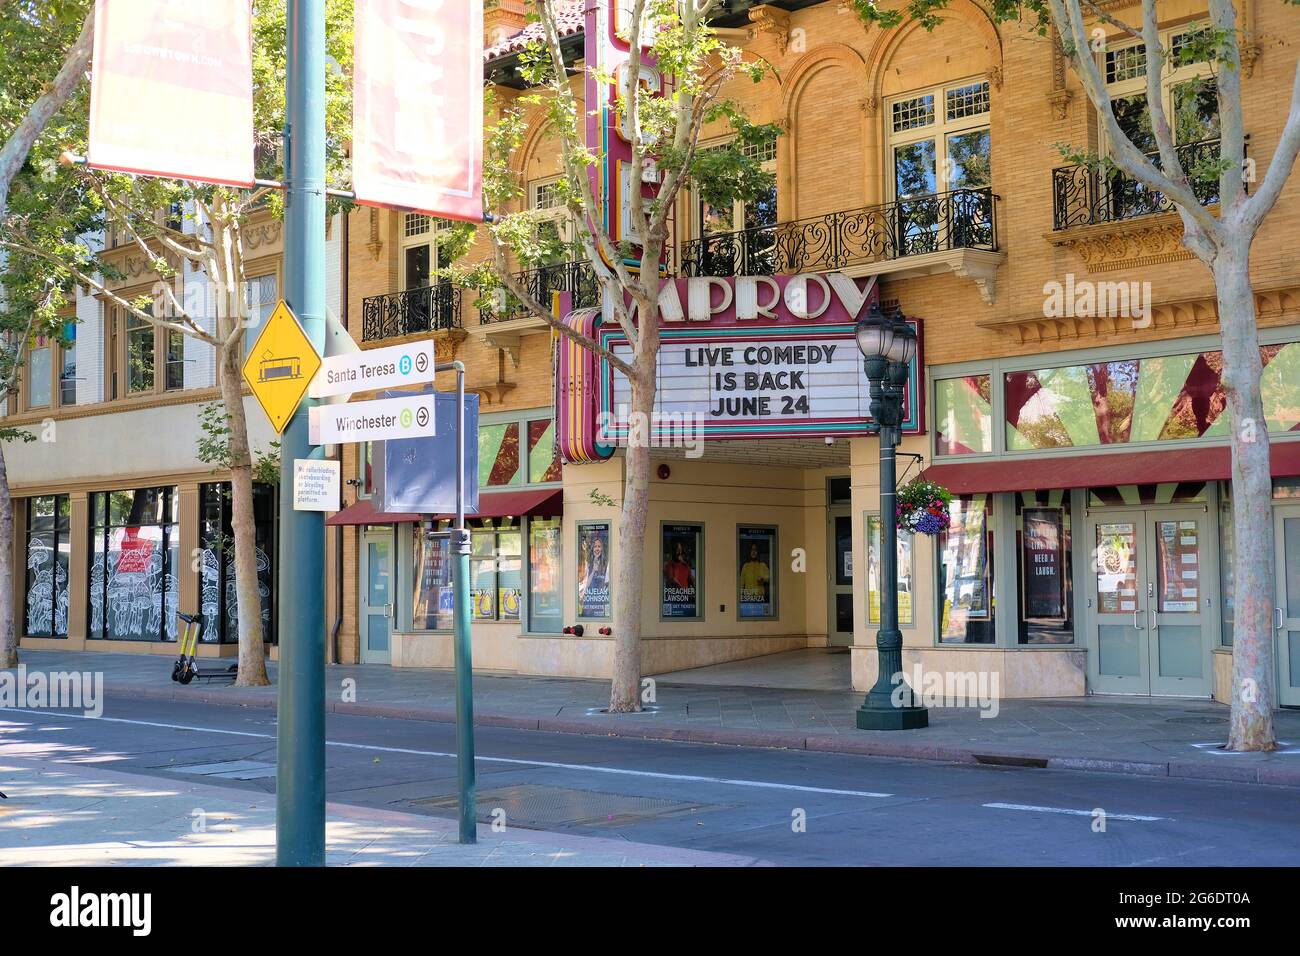 The San Jose Improv Comedy Club marquee in downtown San Jose, California announcing its reopening after Covid-19 pandemic shelter-in-place shutdown. Stock Photo